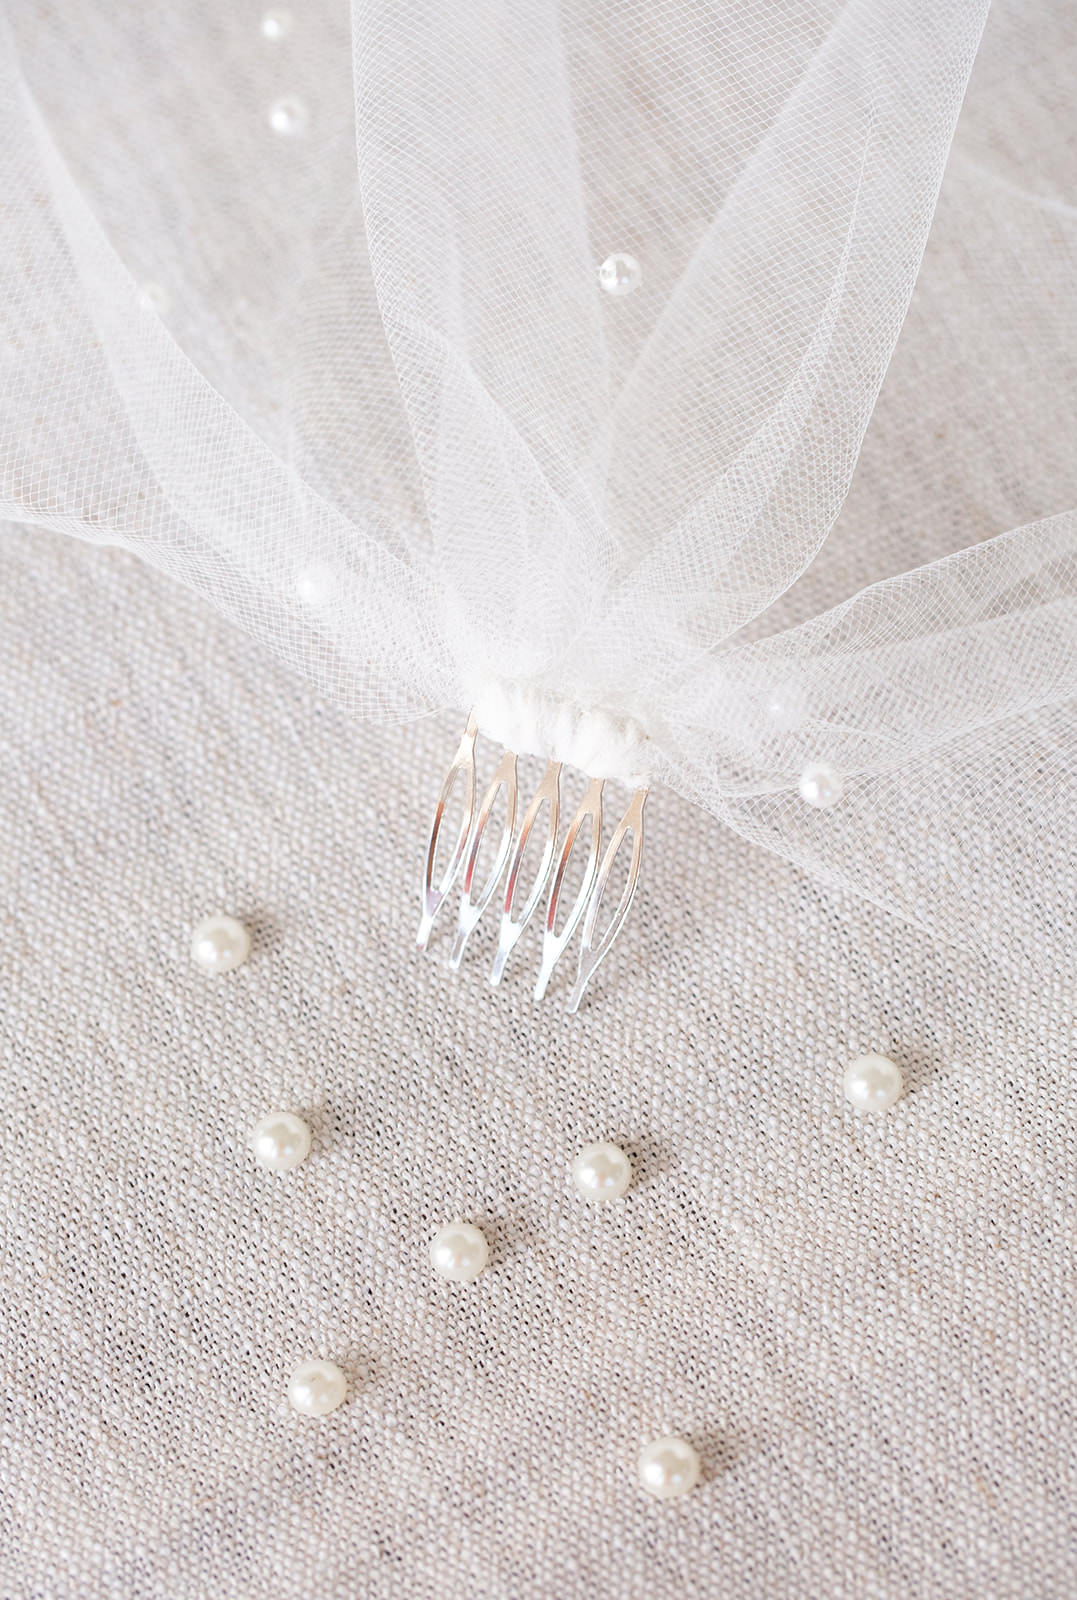 One Blushing Bride Short Birdcage Bridal Veil with Crystals, Chin Length with Comb White / with Scattered Crystals